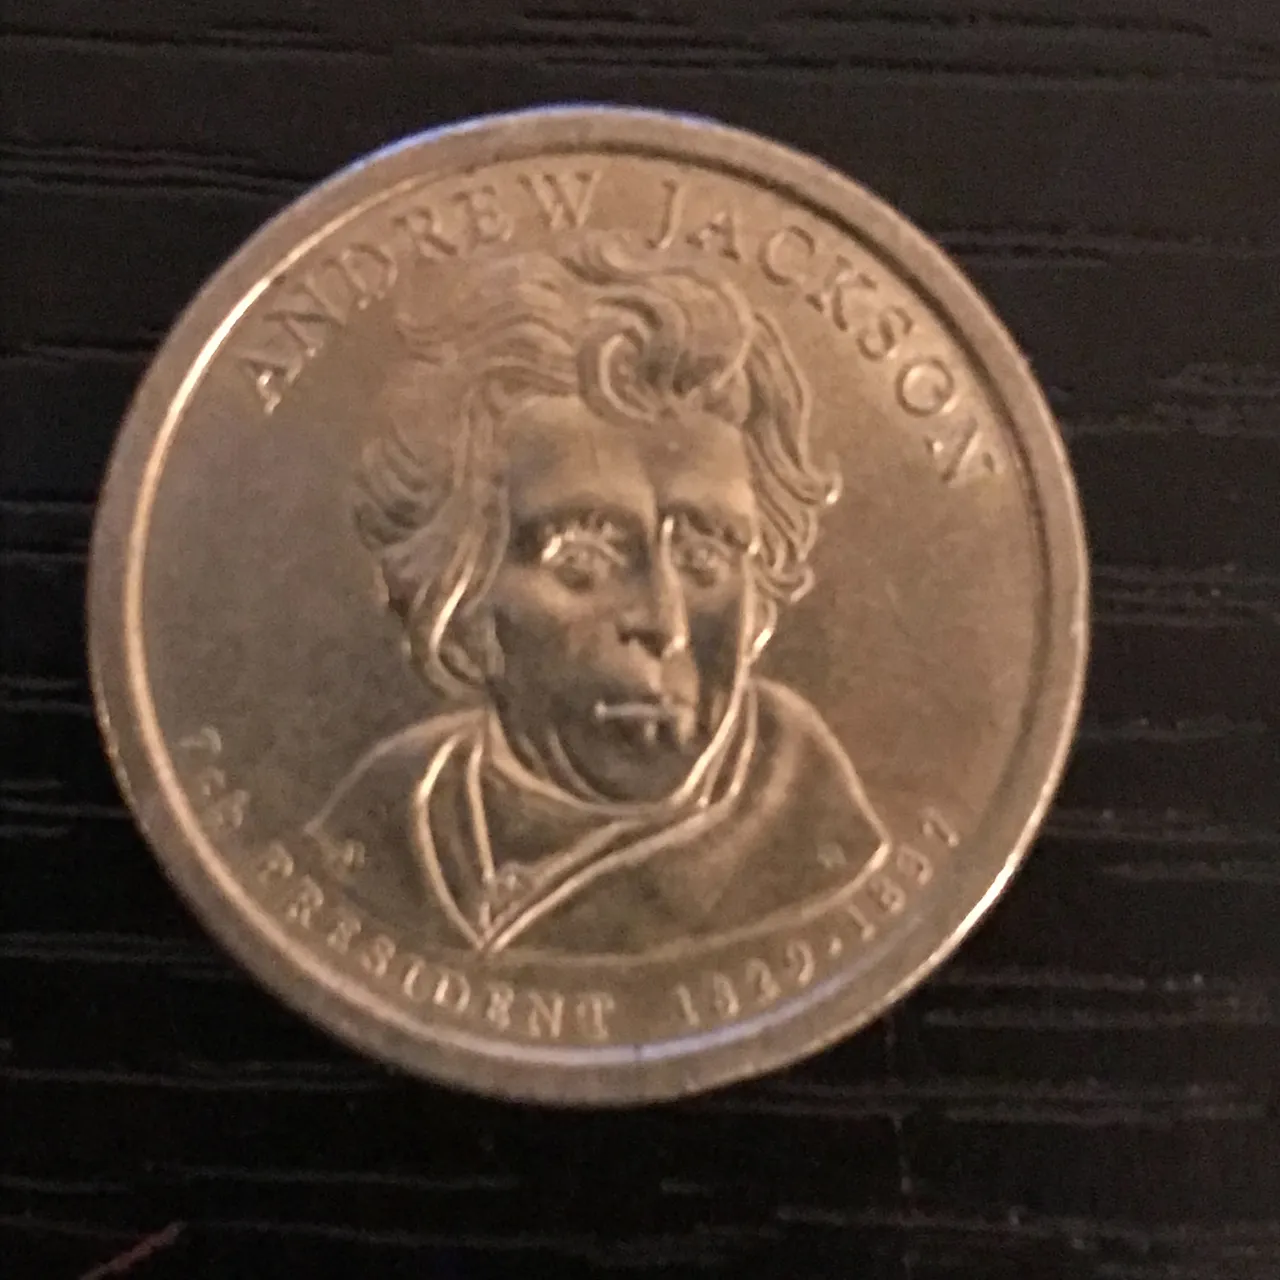 American 2008 Andrew Jackson Presidential $1 USD Coin photo 1